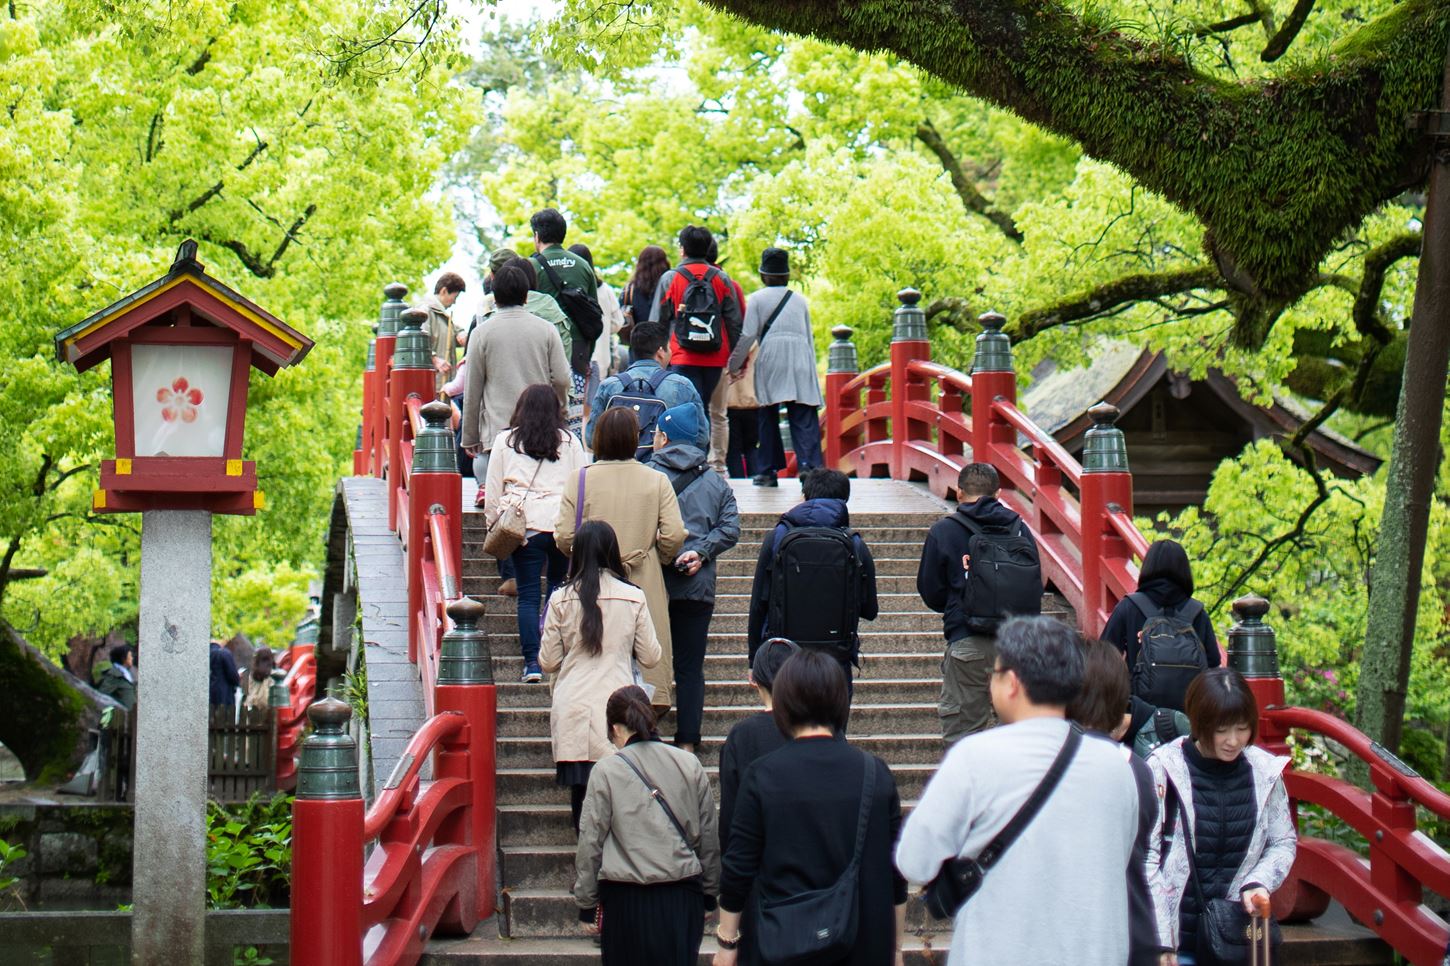 Sightseeing scenery that simply shows the weather and clothes in Fukuoka in April5